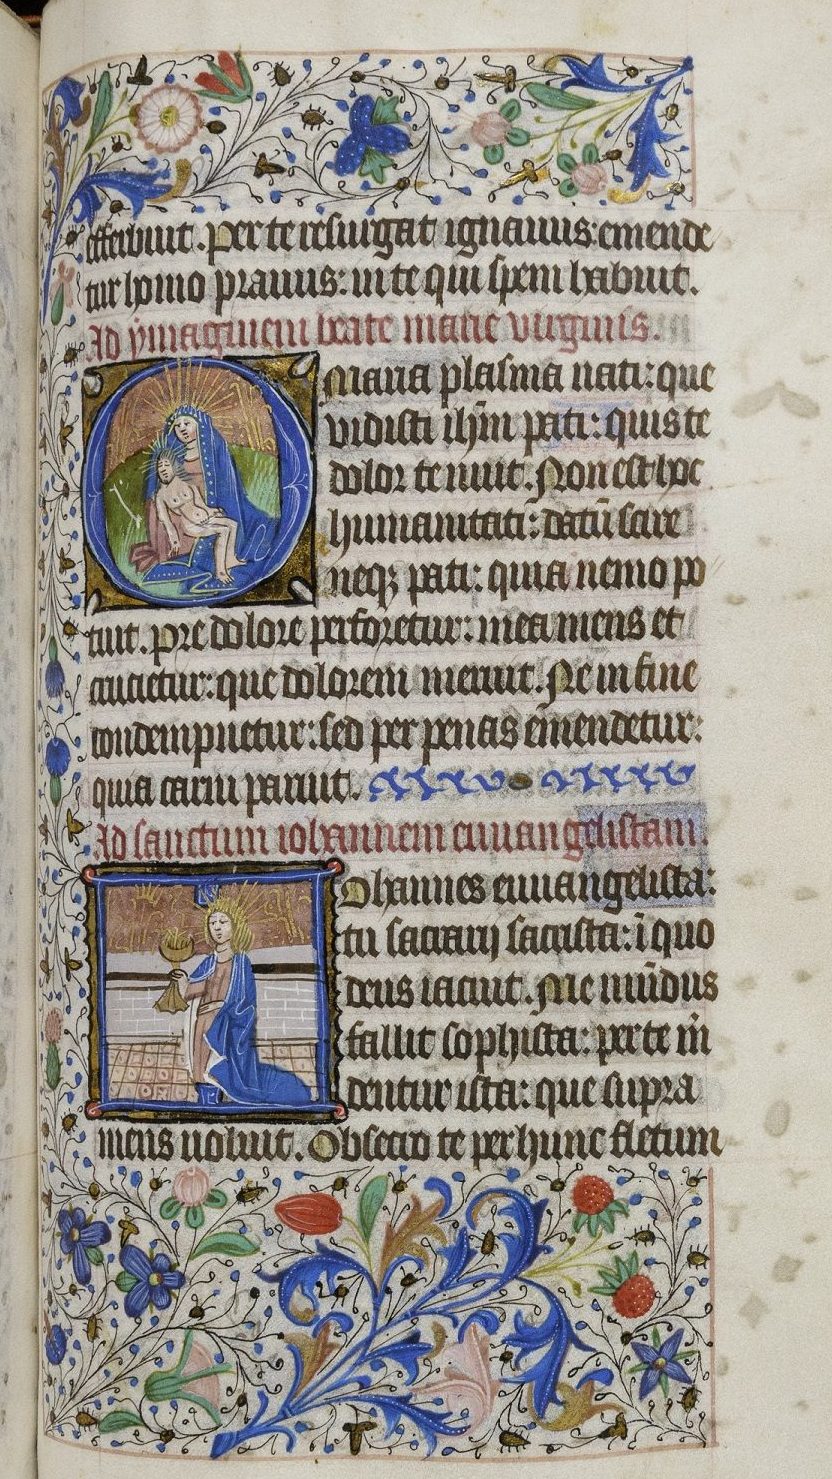 Page of an illuminated medieval manuscript. A border of leaves and flowers surrounds Latin text handwritten in black. There are two small images within the text. In the upper left the Virgin Mary holds Jesus inside of an illuminated "O." In the lower left, a person with a halo and a blue cloak holds a goblet.